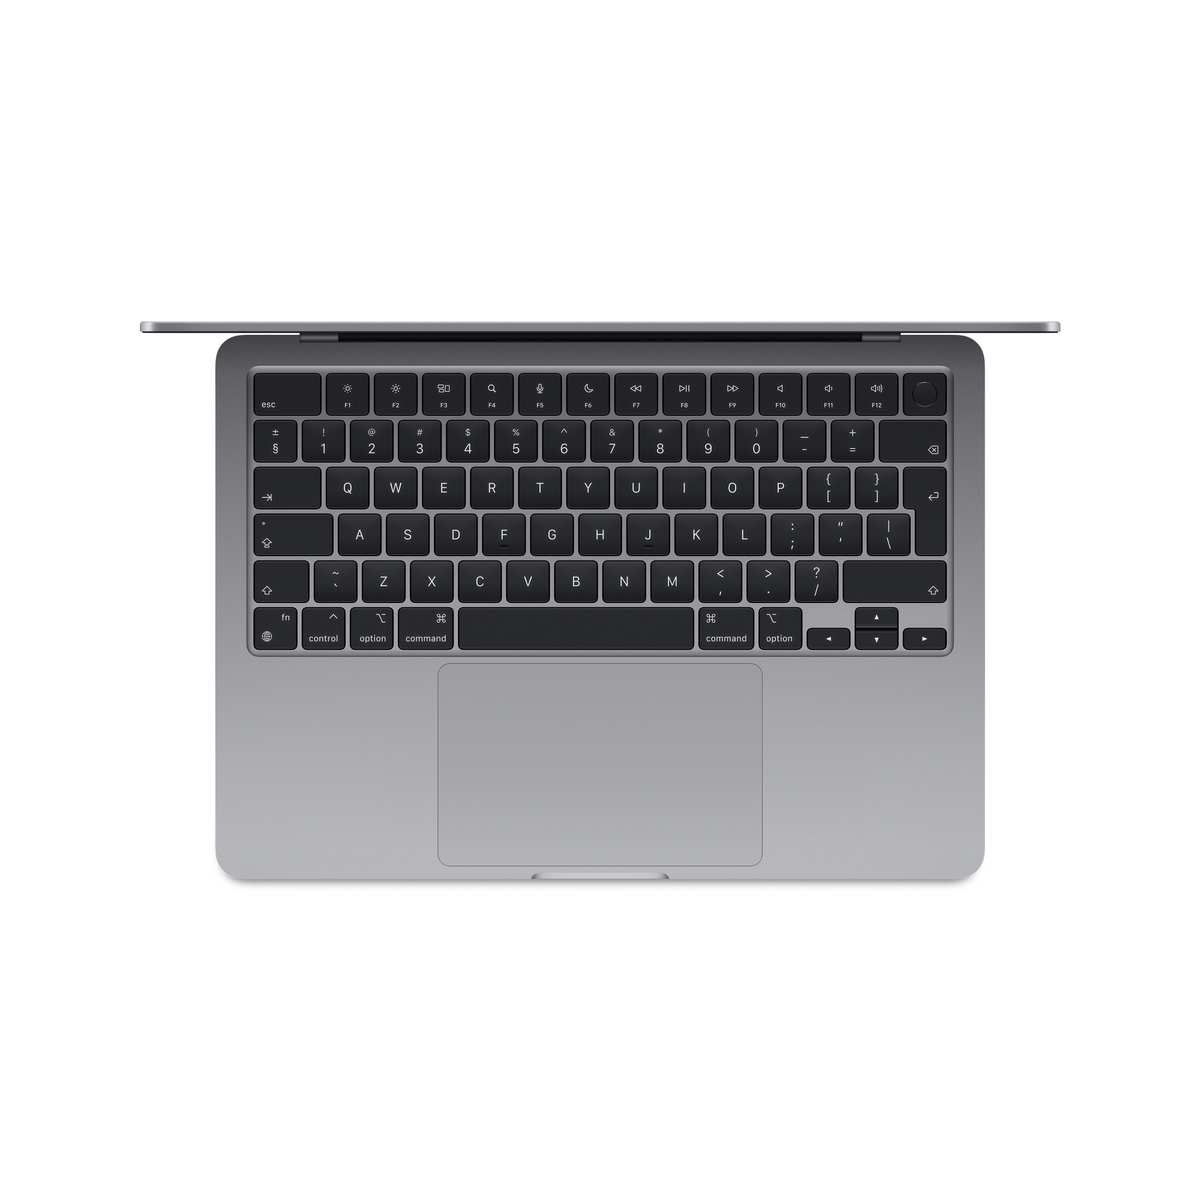 Apple MacBook Air, 13 inches, 8 GB RAM, 512 GB SSD, Apple M3 chip with 8-core CPU and 10-core GPU, macOS, Arabic, Space Grey